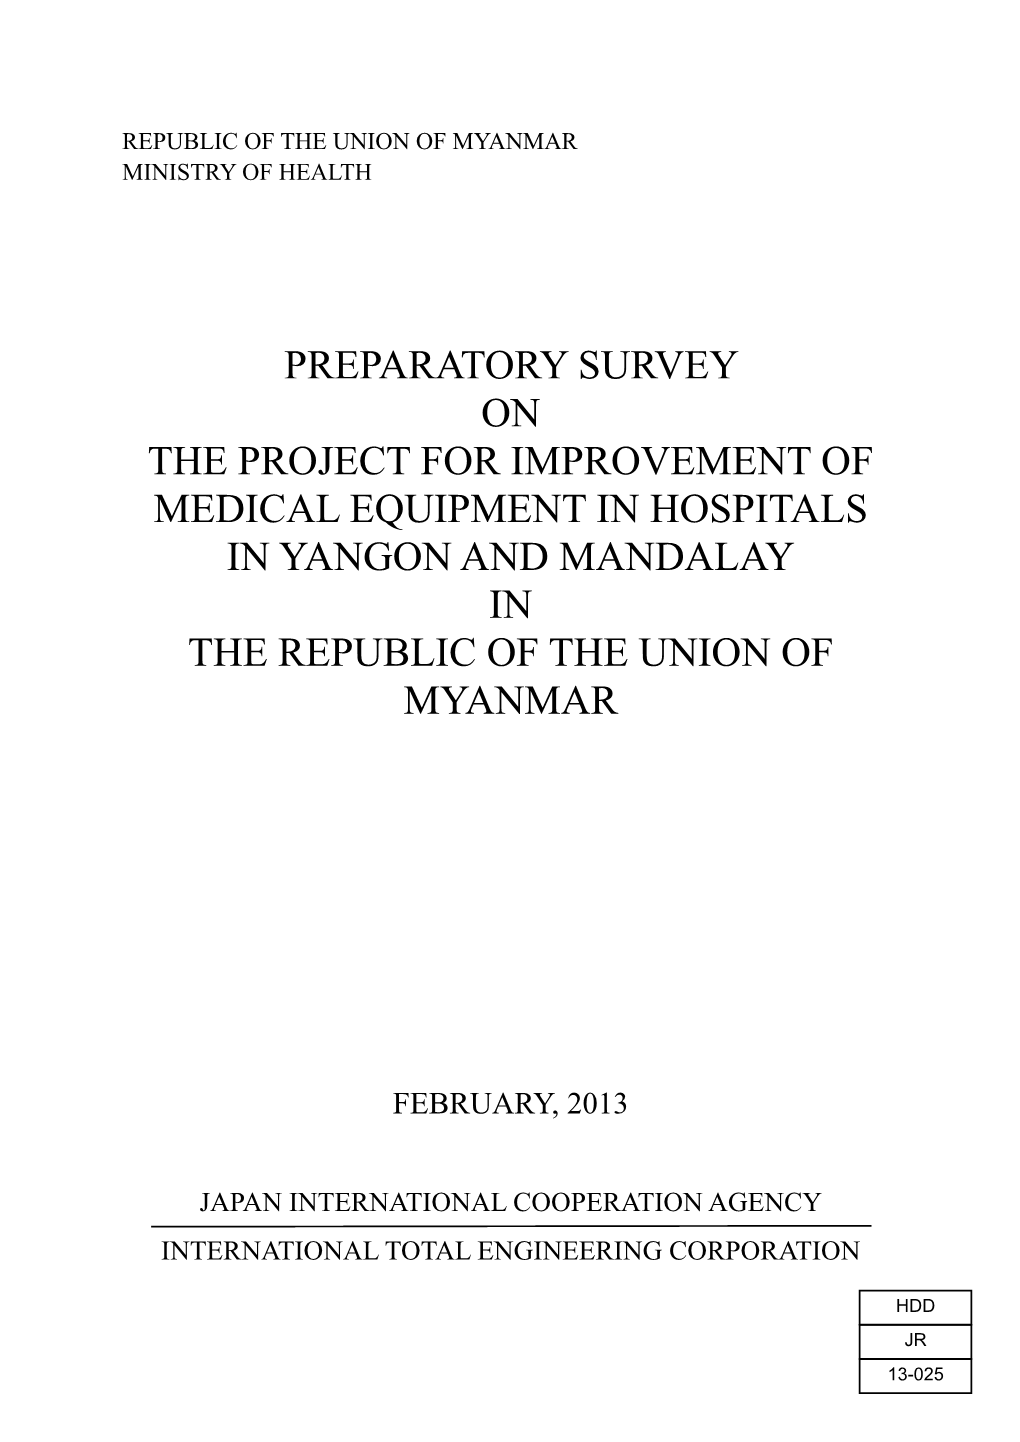 Preparatory Survey on the Project for Improvement of Medical Equipment in Hospitals in Yangon and Mandalay in the Republic of the Union of Myanmar